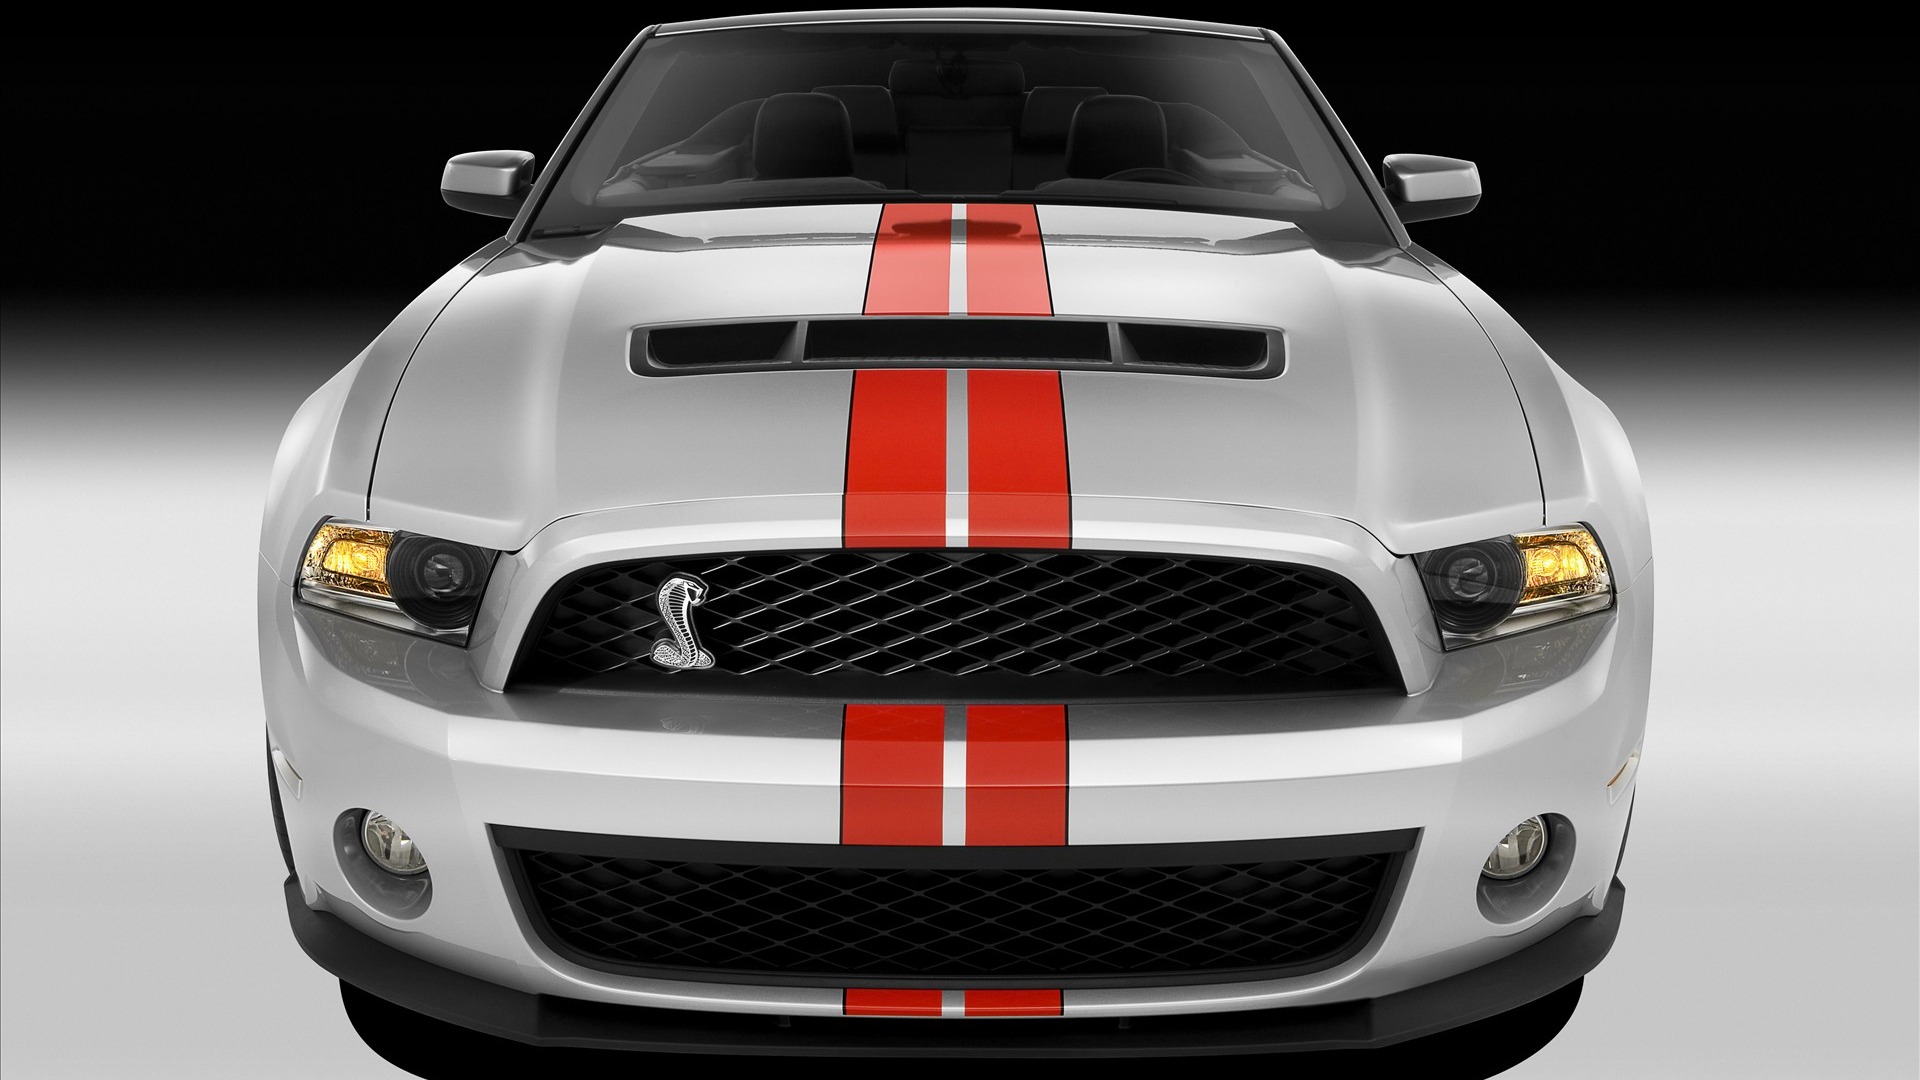 Ford Mustang GT500 Wallpapers #3 - 1920x1080